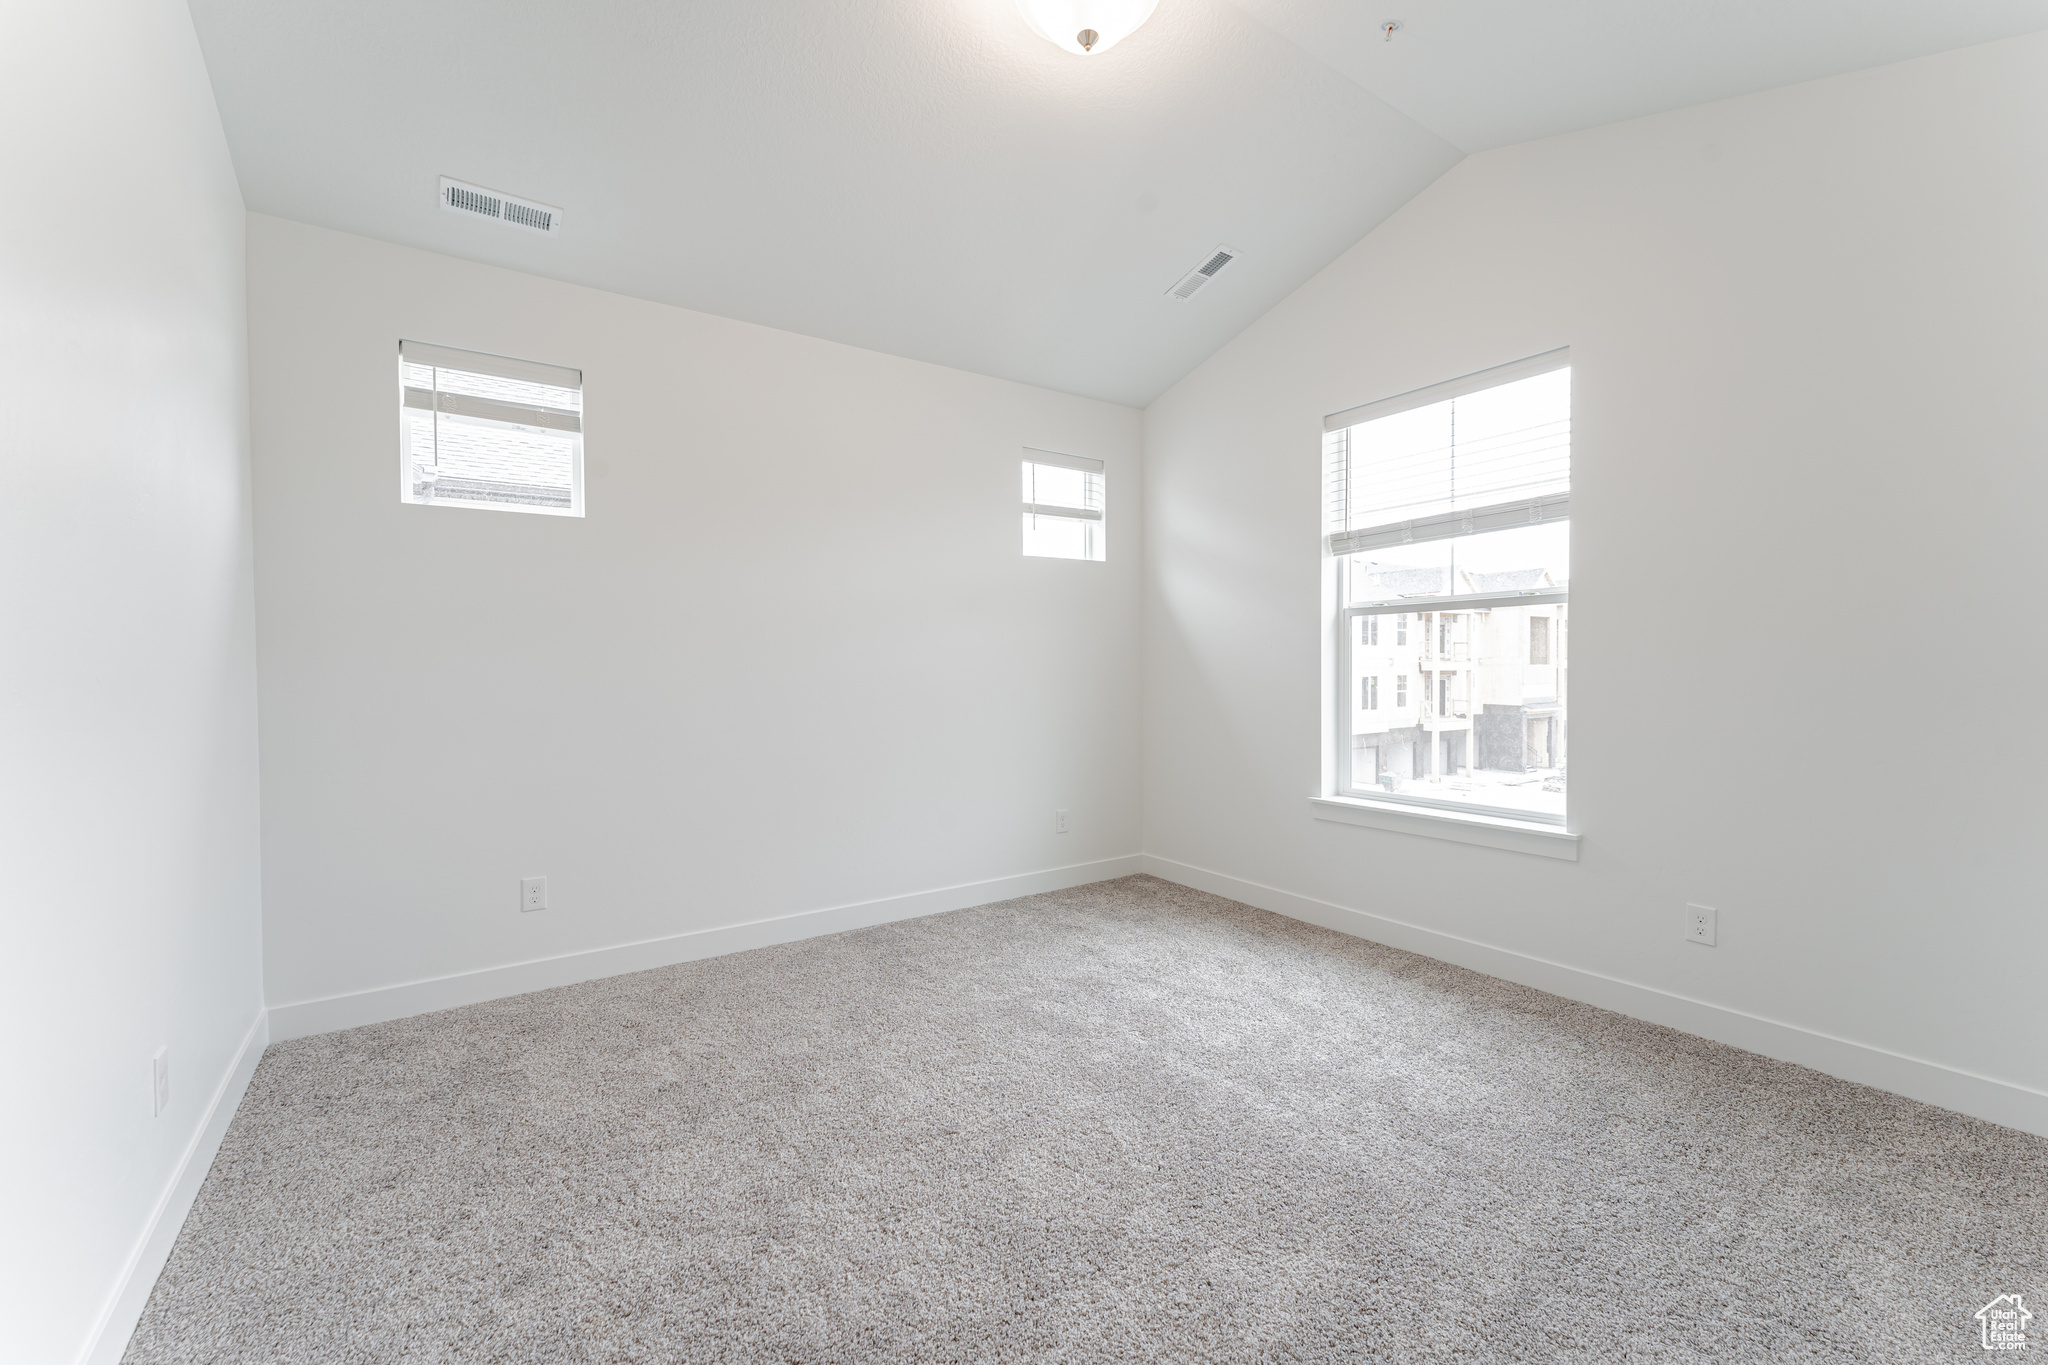 Carpeted spare room with plenty of natural light and vaulted ceiling